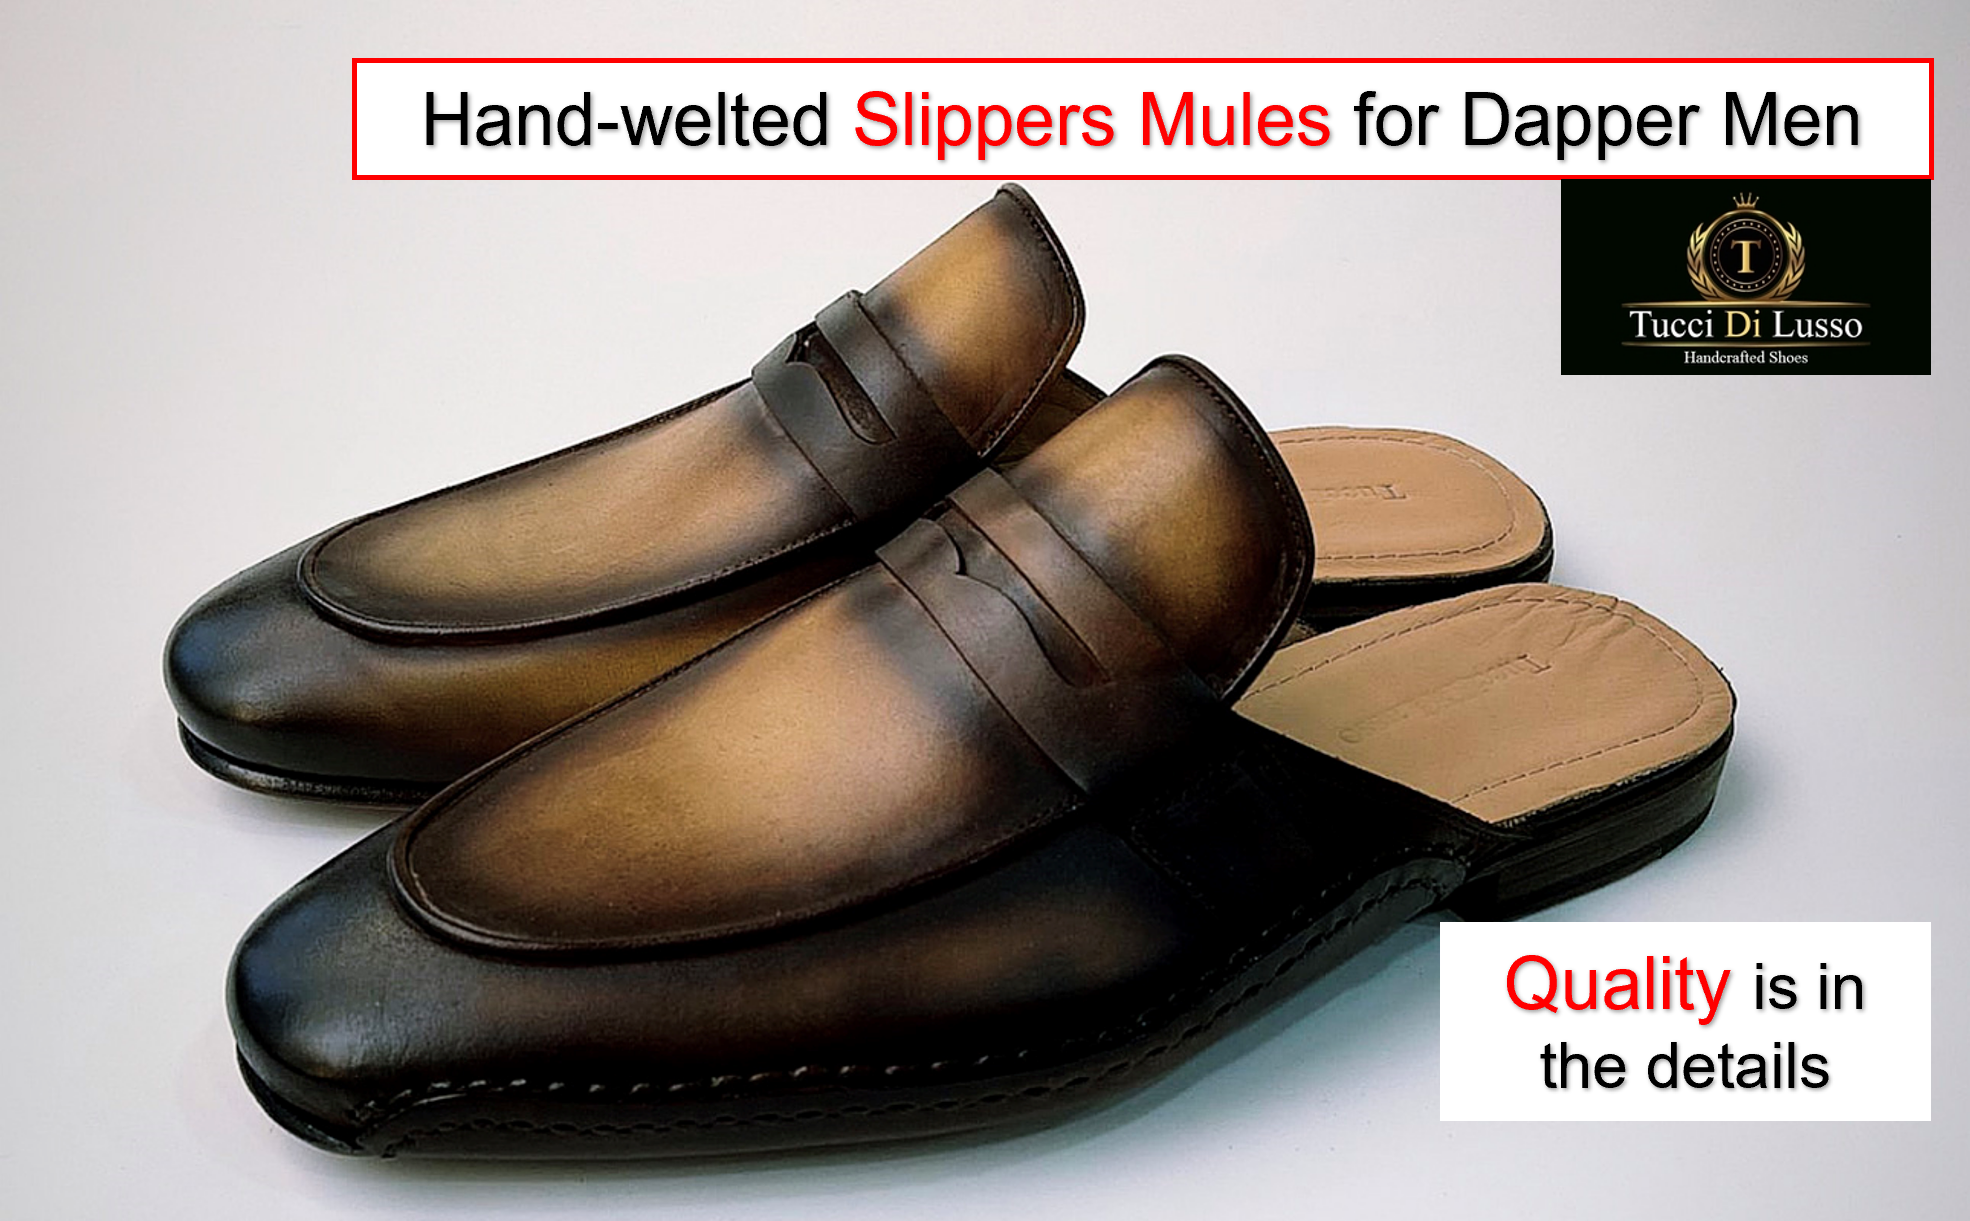 Hand-welted Slippers Mules for Dapper Men

@),

Tucci Di Lusso
Handcrafied Shoes

   
  
 

a
= &gt;
=
5 ‘

Quality is in
the details